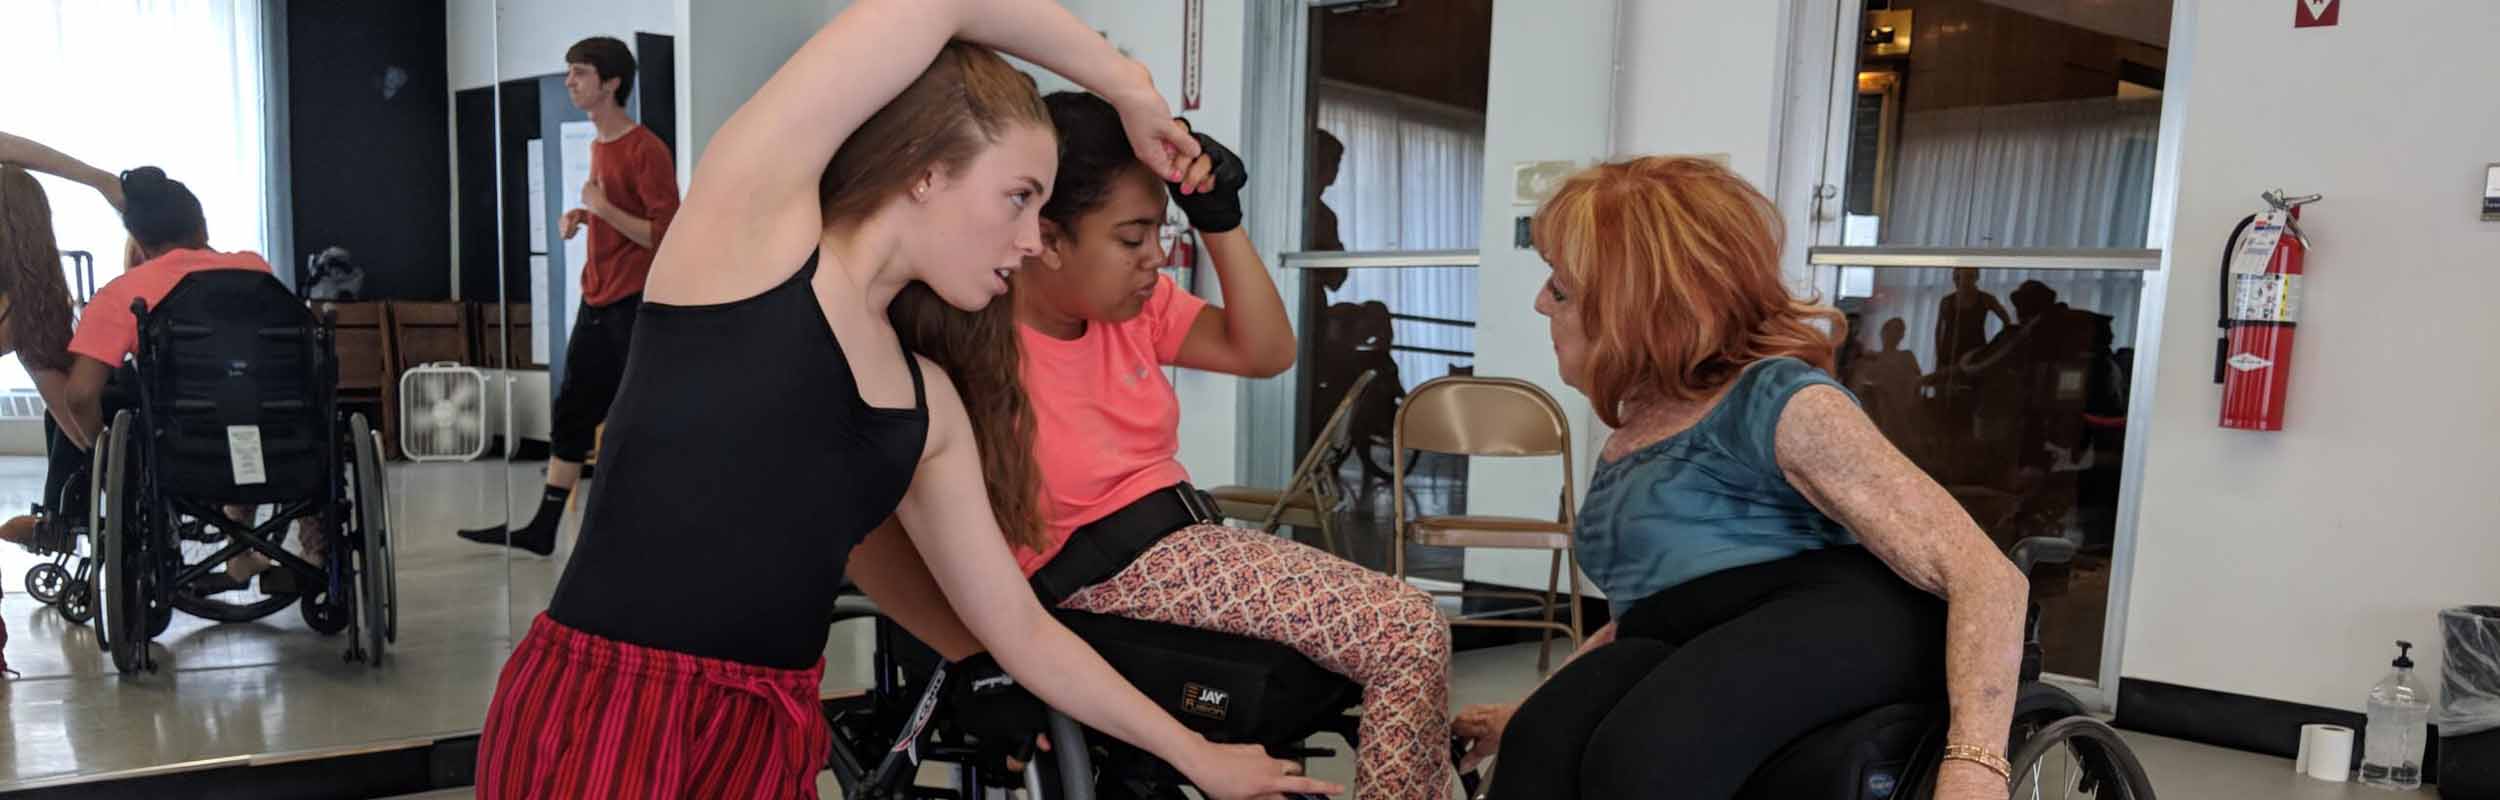 Mary, a sit-down dancer, teaches two students non-traditional partnering